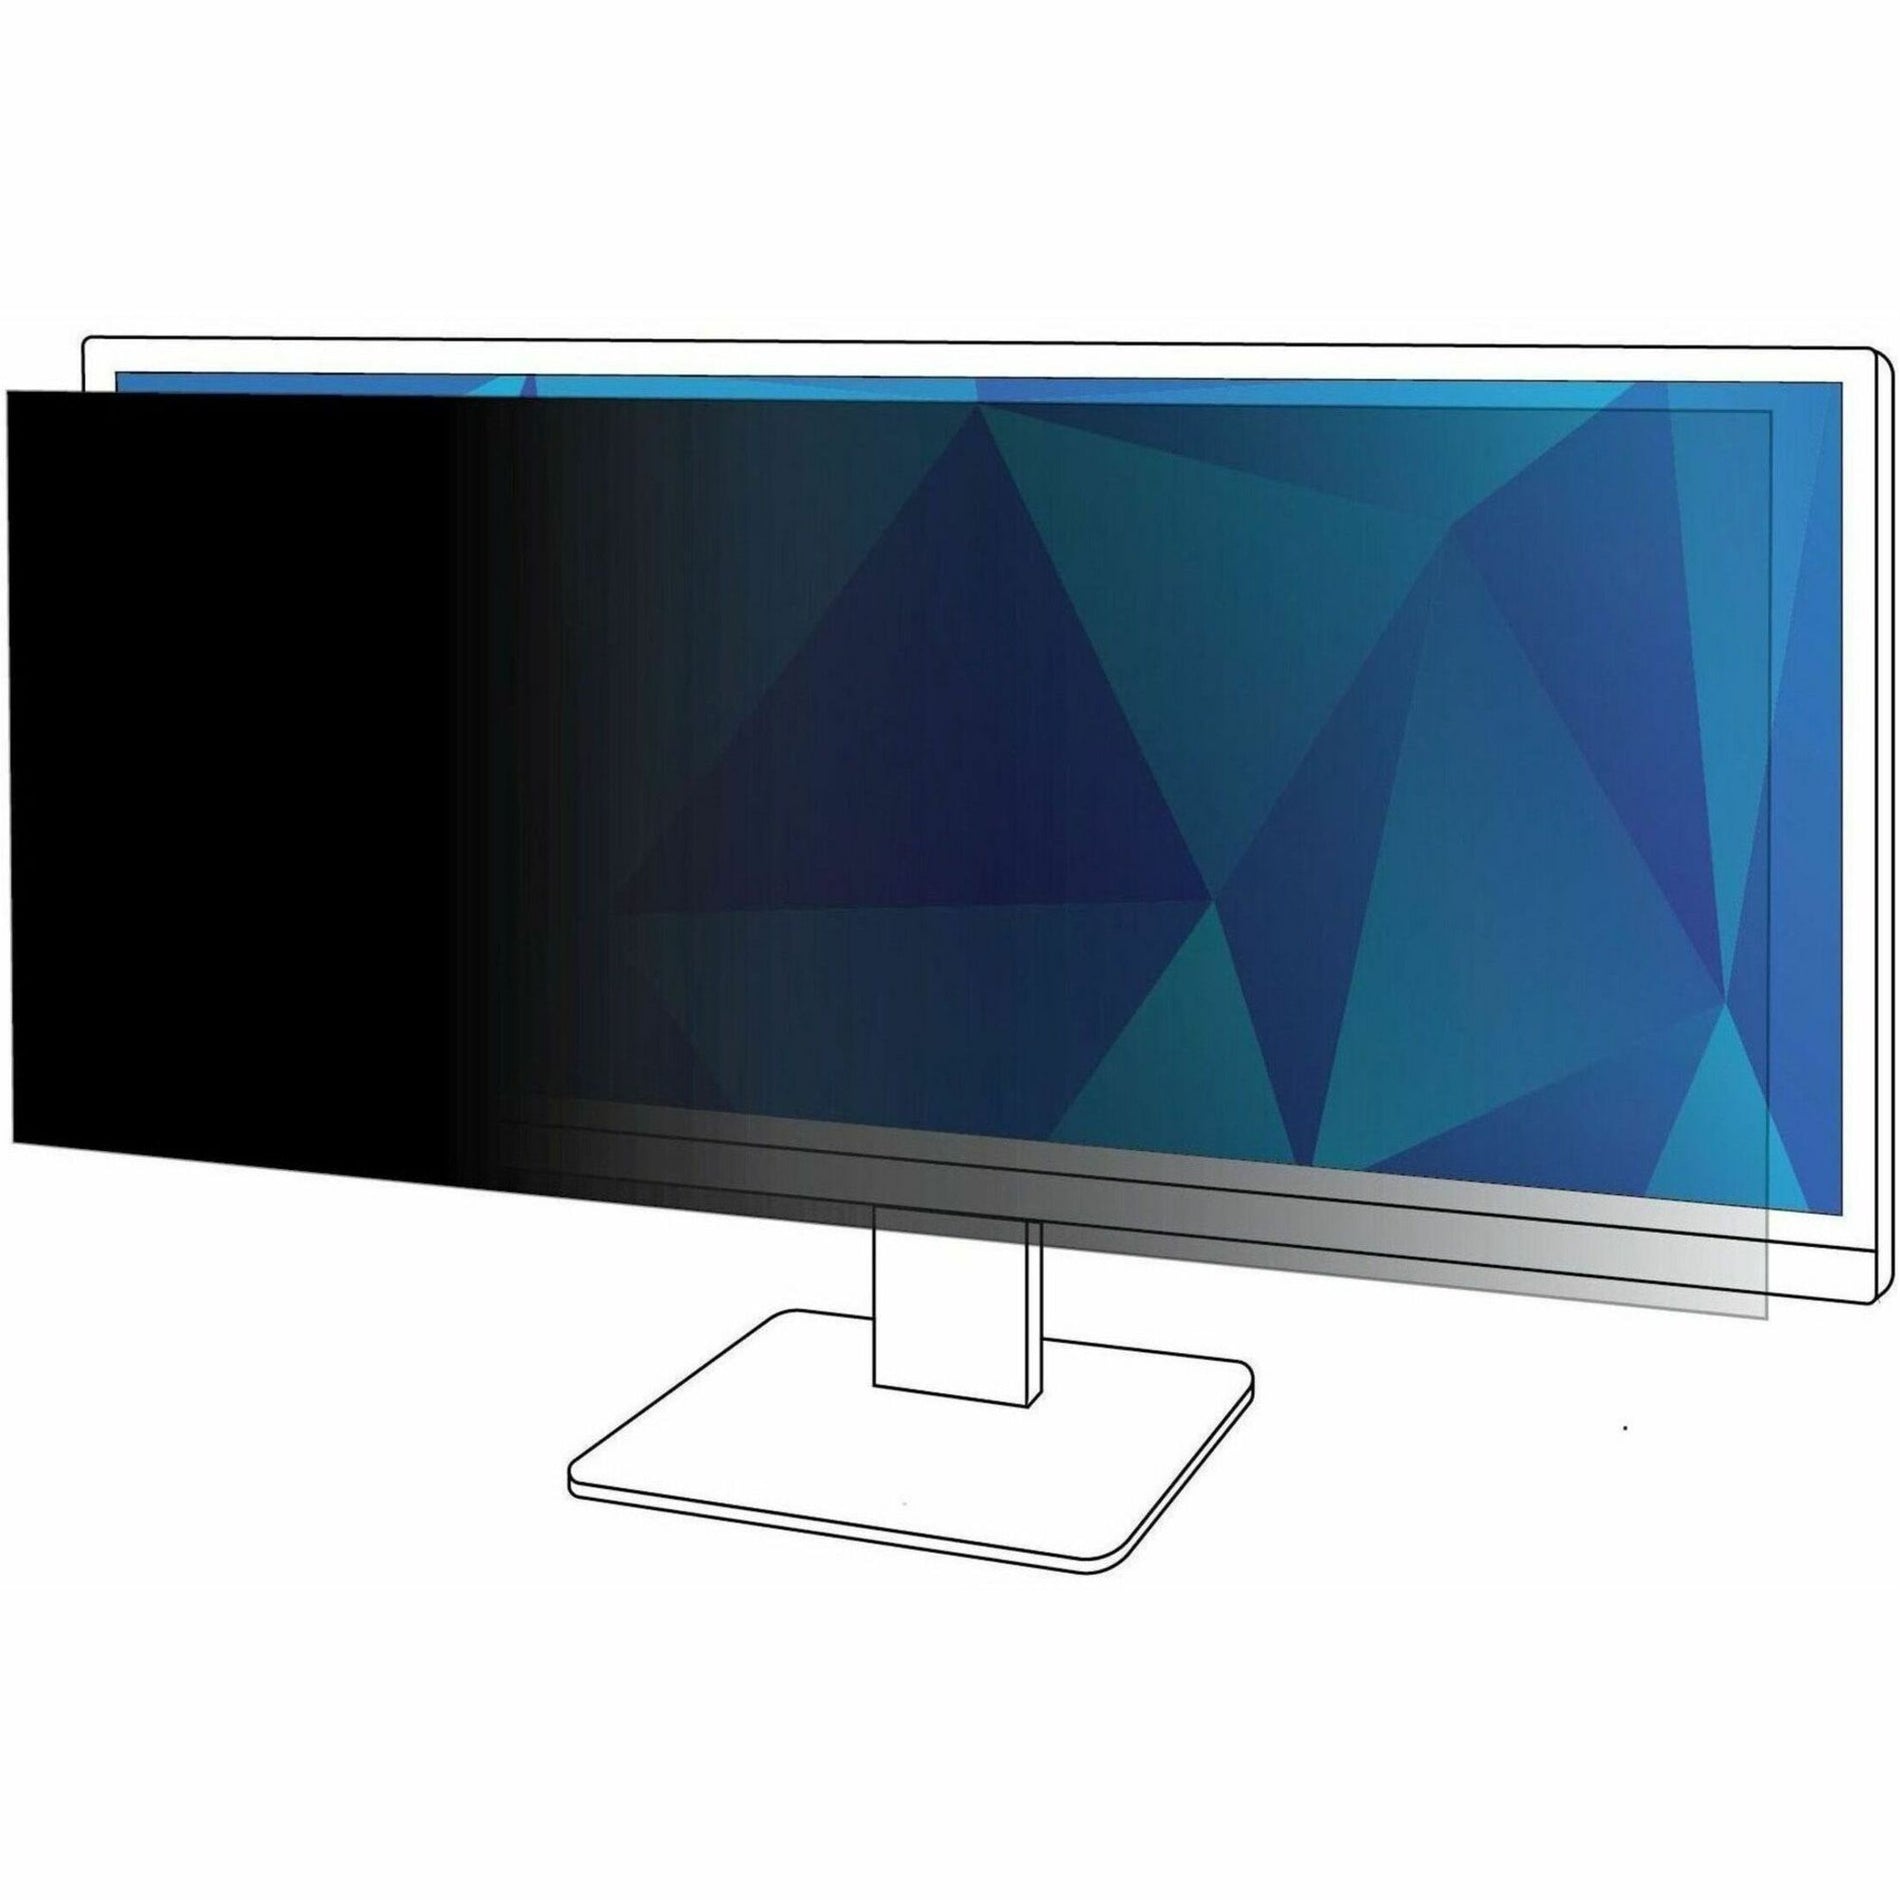 3M PF340W2B Privacy Filter Black Matte, Reversible Glossy-to-Anti-glare, Blue Light Reduction, Limited Viewing Angle, Crystal Clear Image, 34" Widescreen LCD Monitor